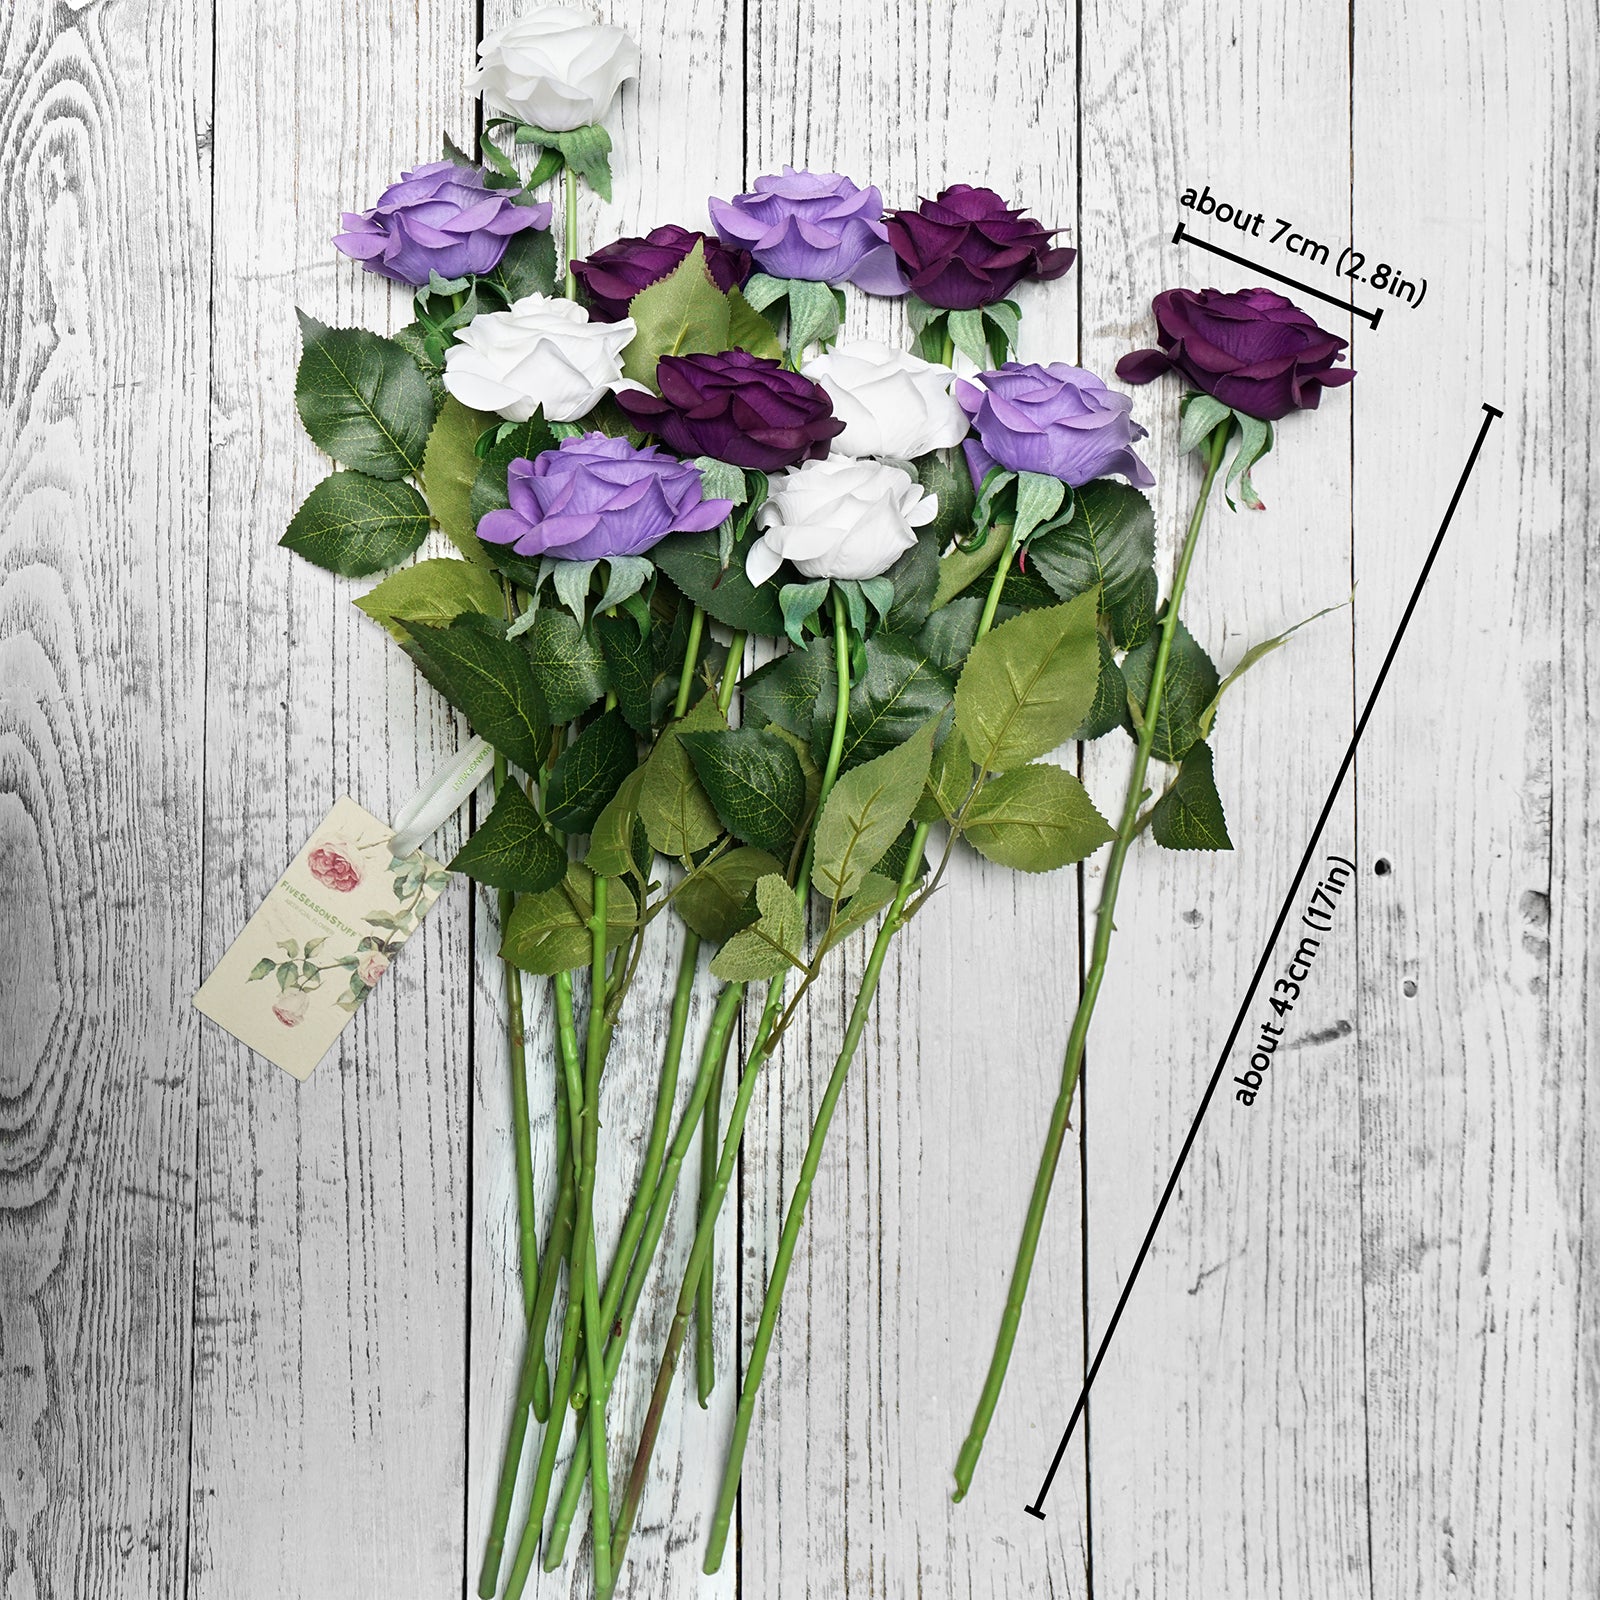 green and purple rose